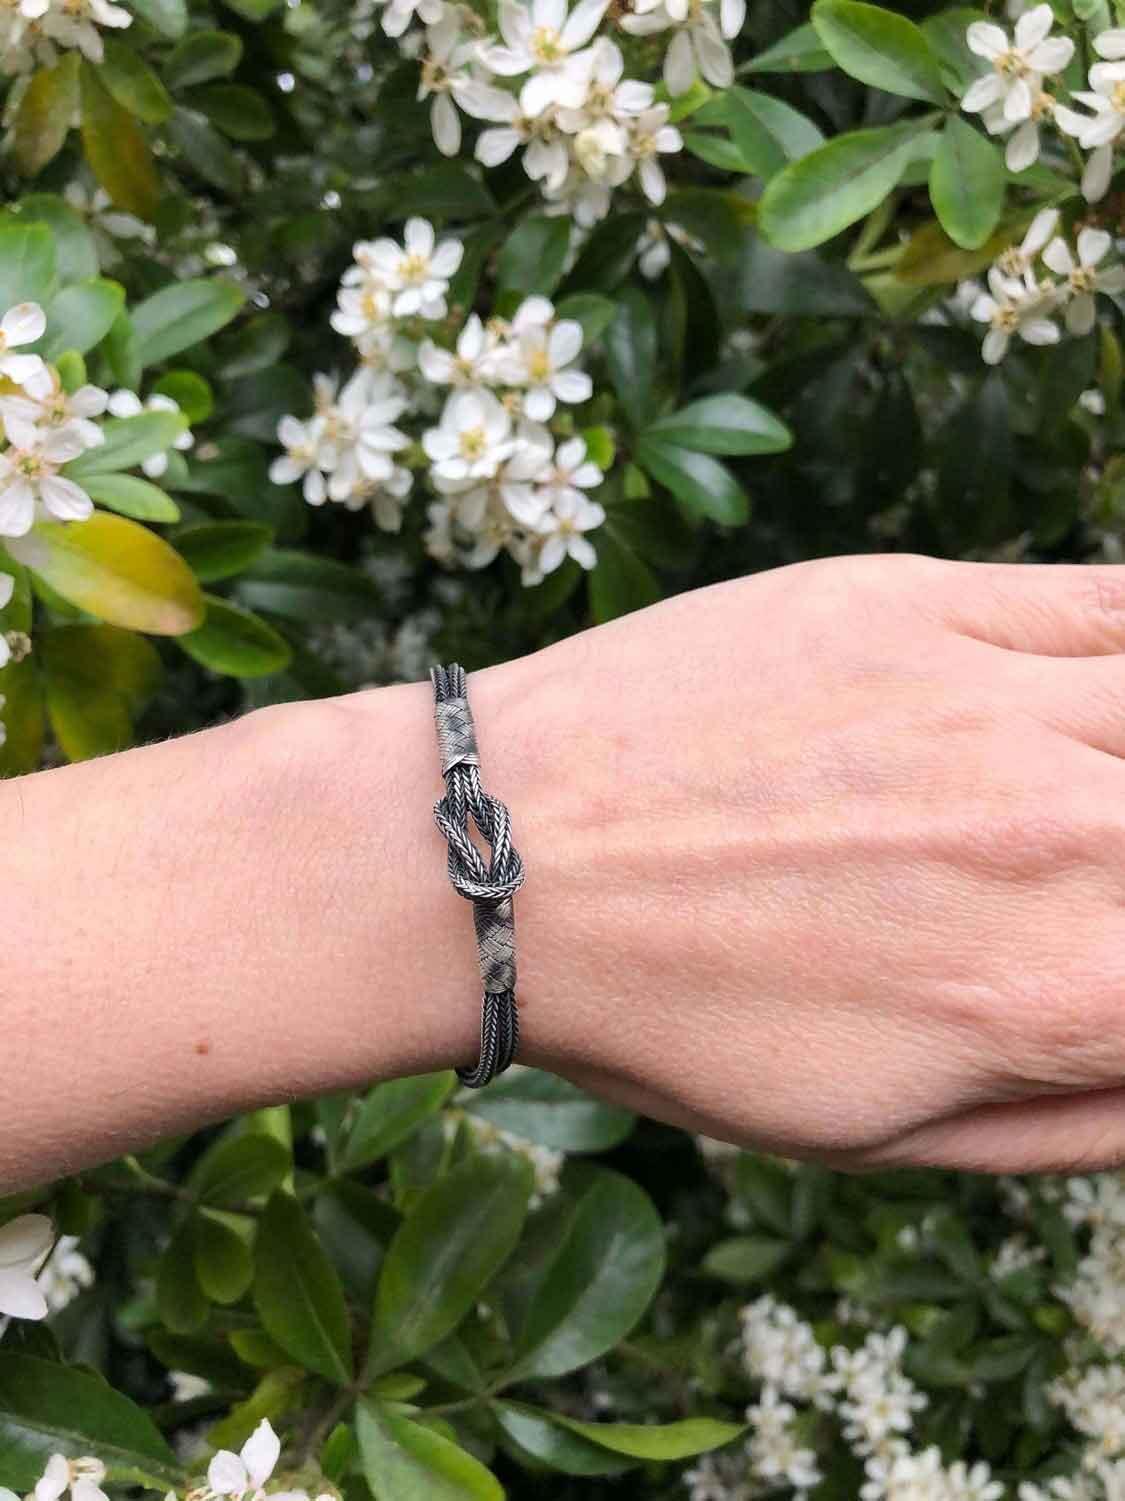 High-Quality BRAIDED BRACELET, Sterling Silver, Weaved Handmade Bracelet, Silver Chain Bracelet, Layered Bracelet, Birthday Gift Bracelet, Boho Bracelet available at Moyoni Design